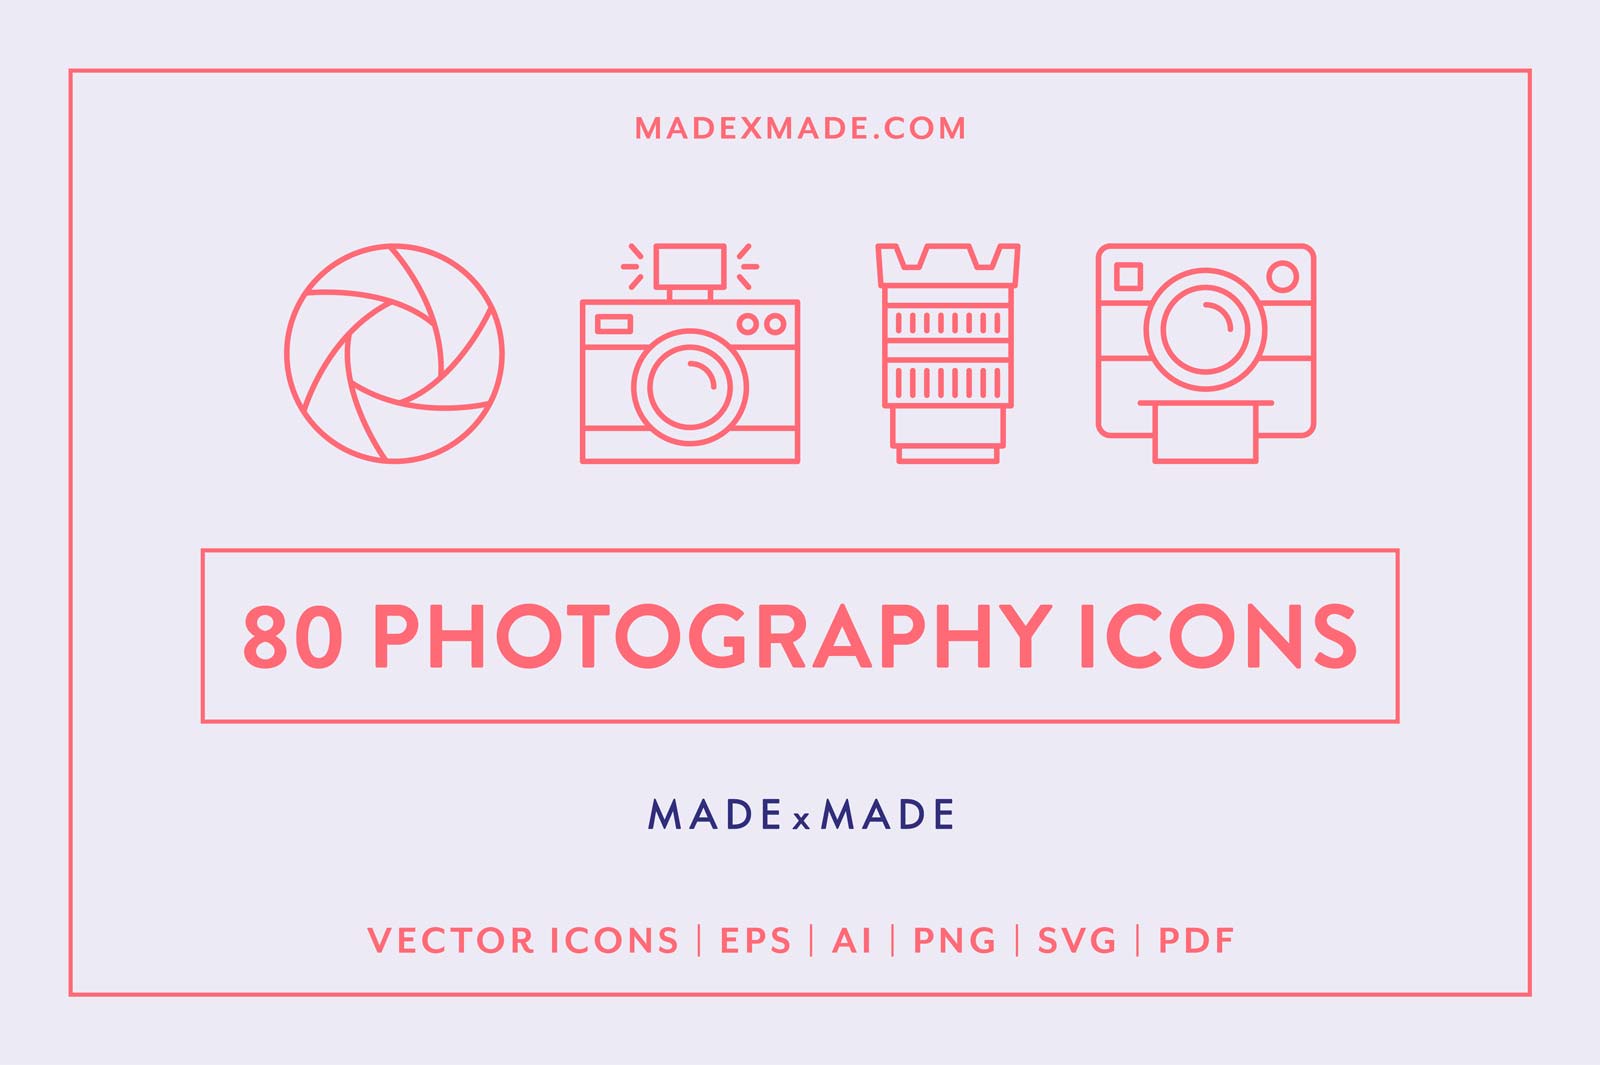 made x made icons photography